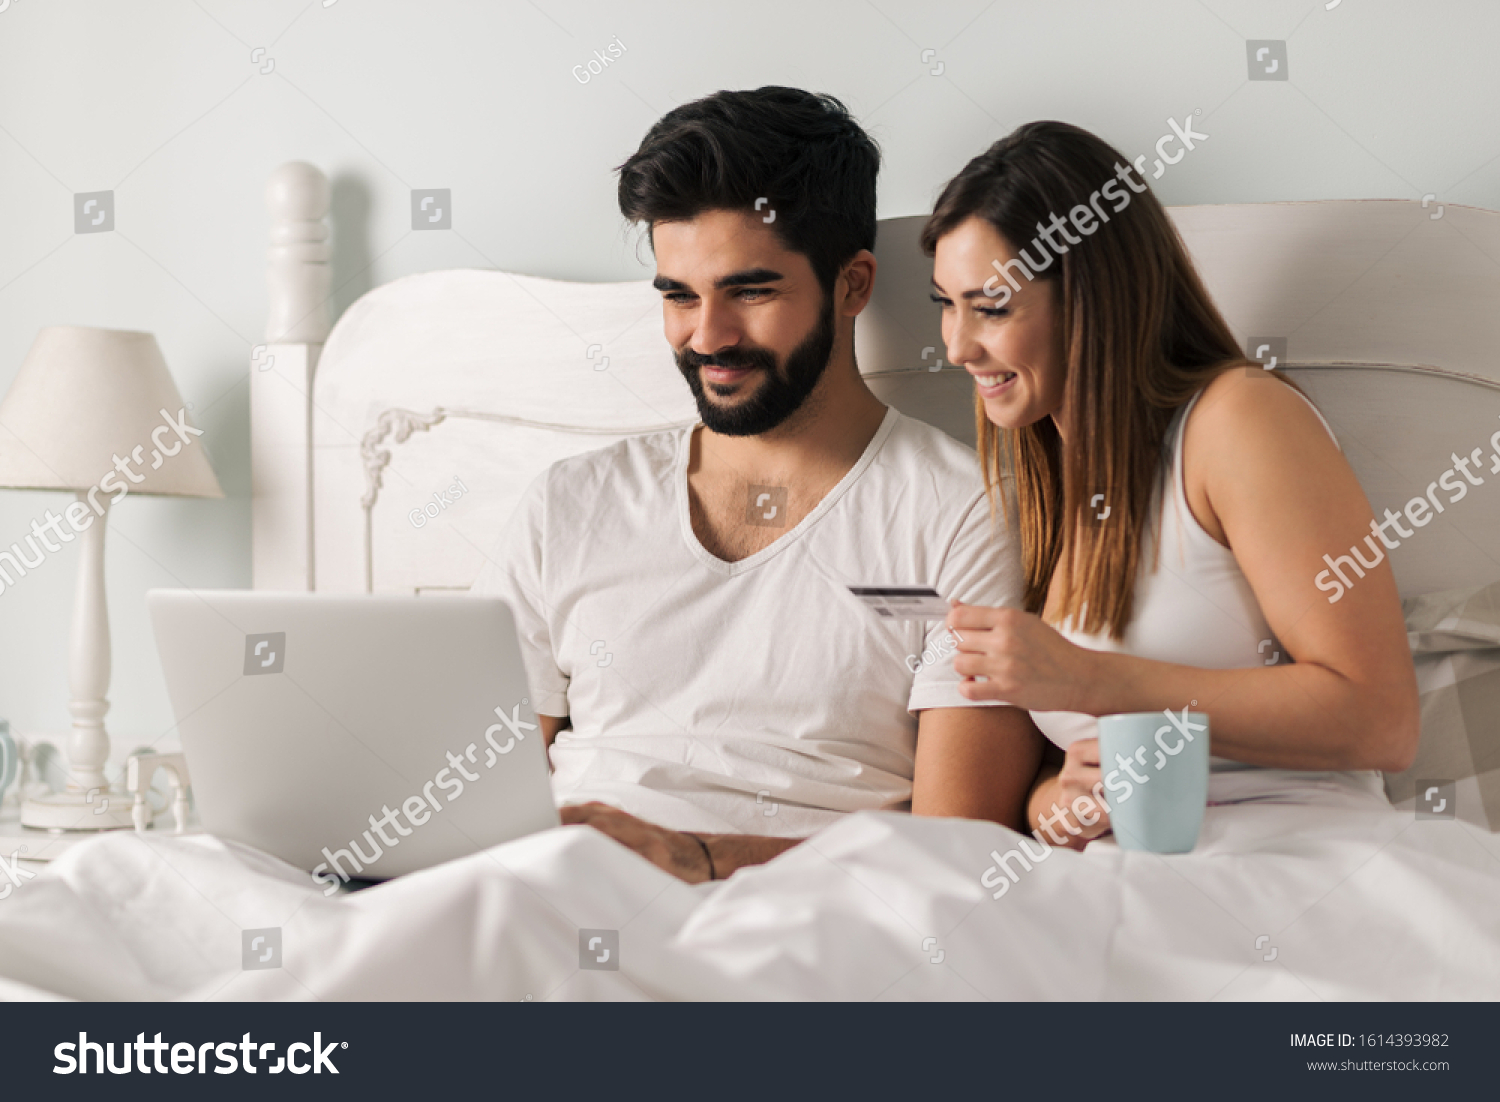 Smiling couple using laptop and credit card for e-commerce while sitting in bed #1614393982